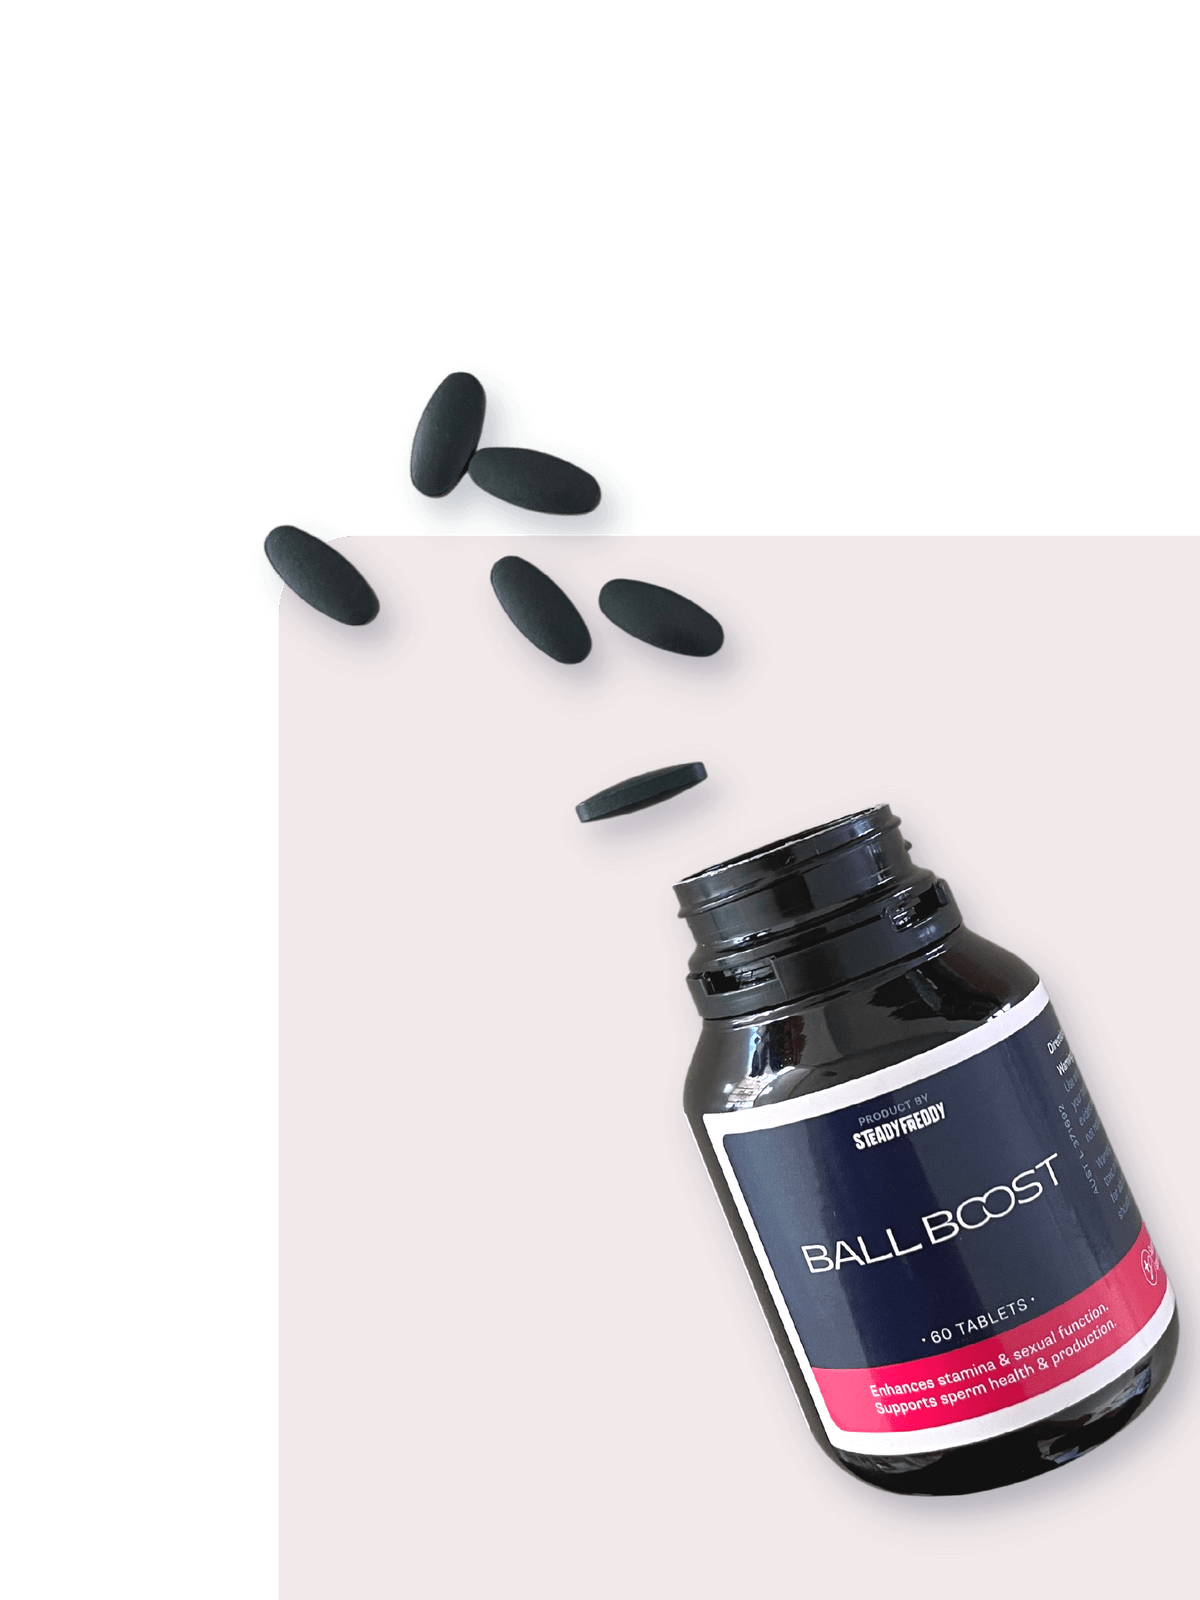 A supplement specifically designed to optimise aspects of men's health.